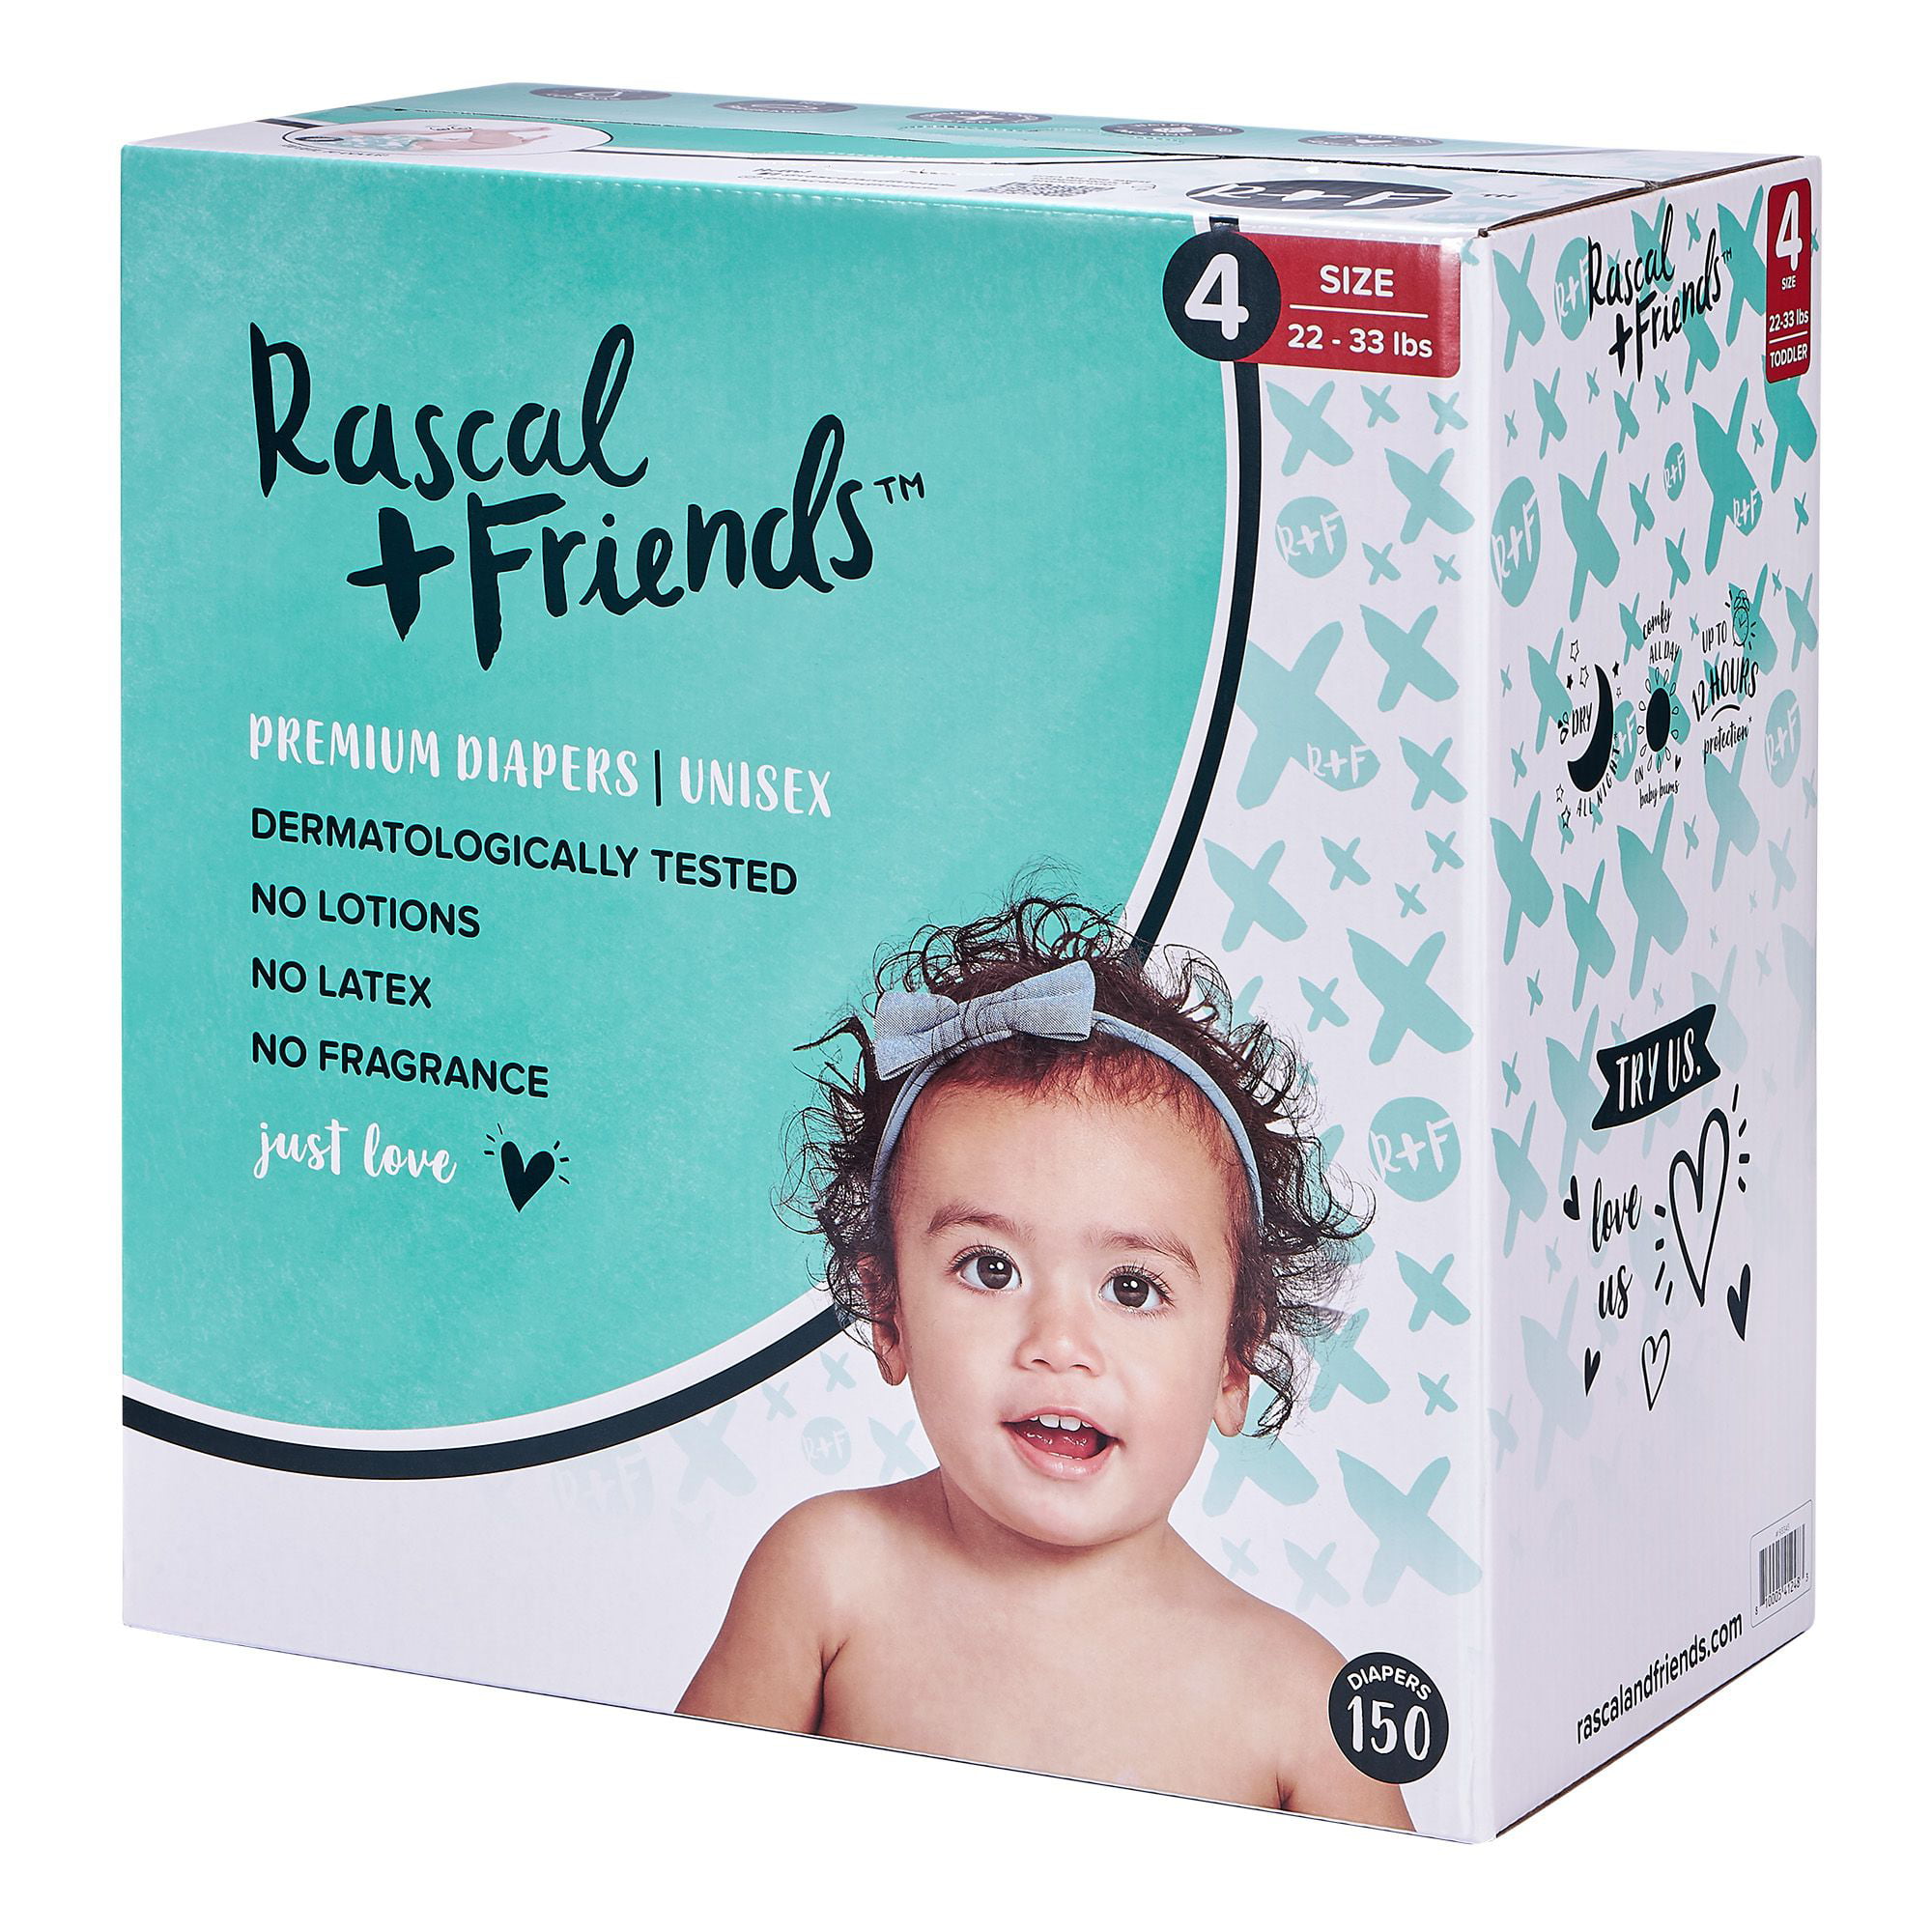 rascal friends diapers